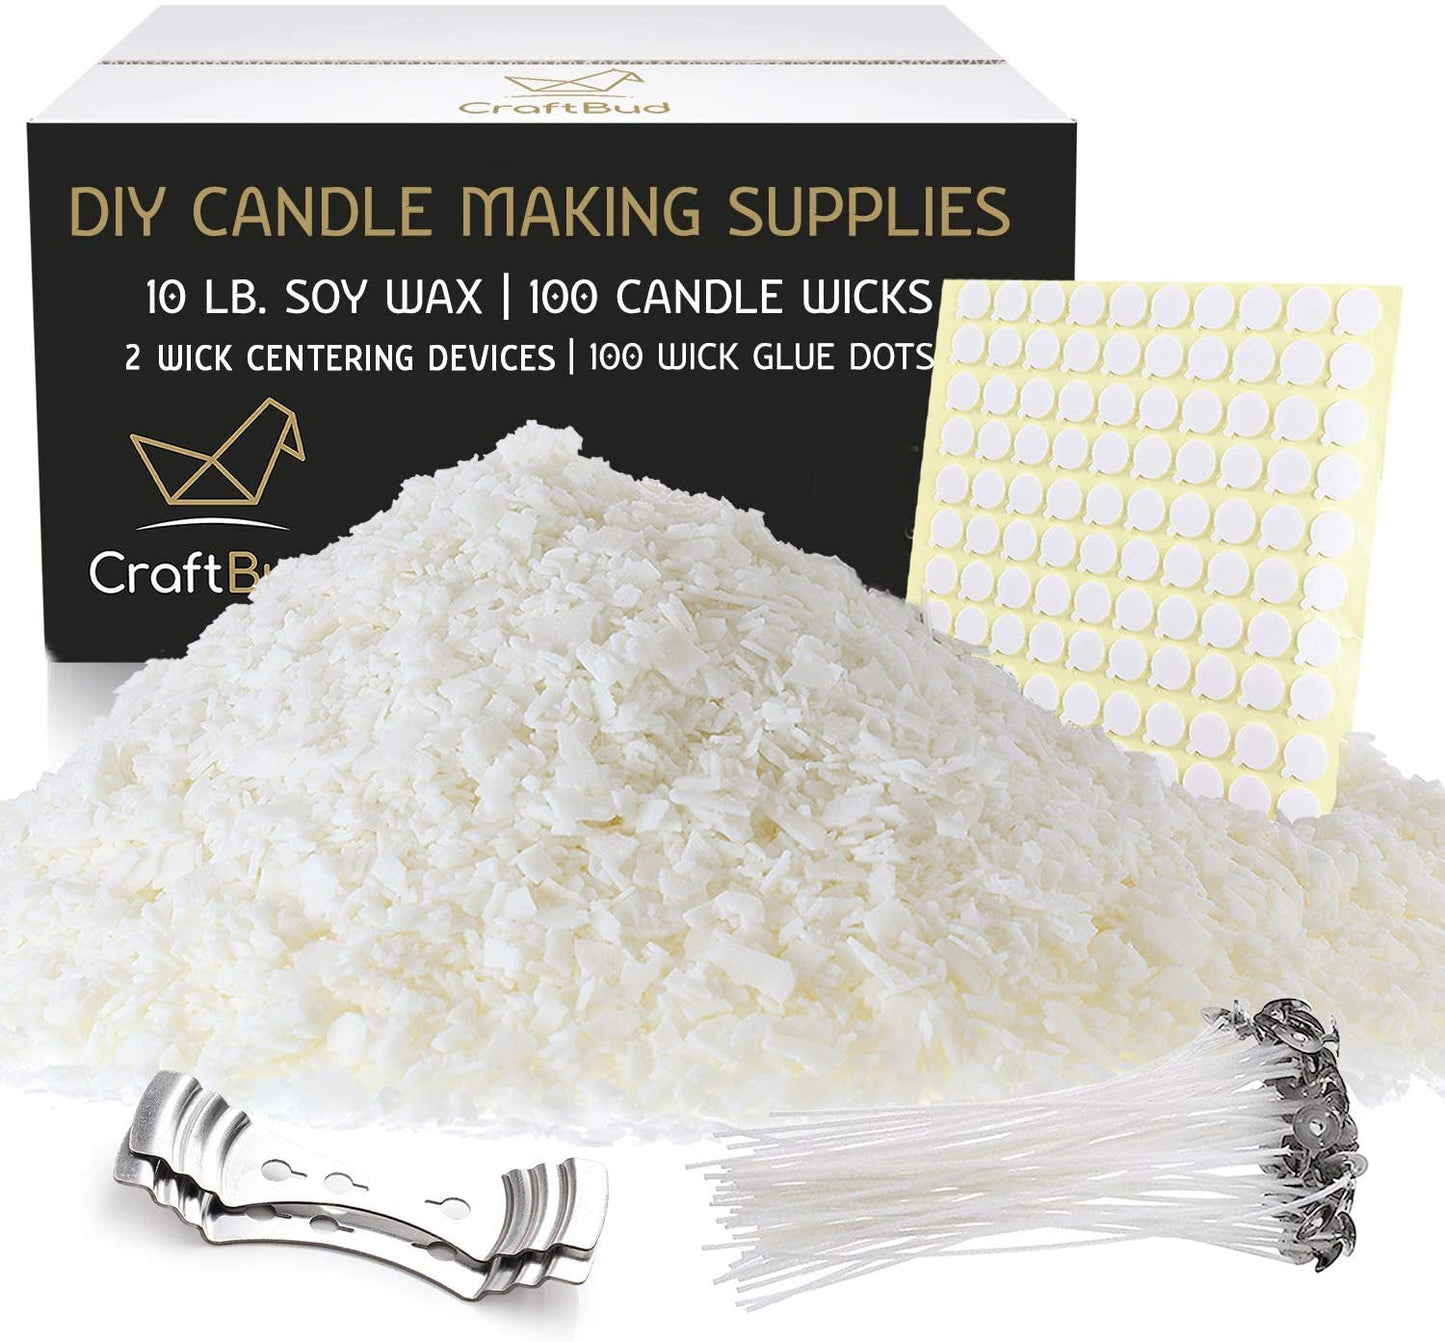 10 lb Natural Soy Candle Wax for Candle Making with Cotton Candle Wicks, Wick Stickers, and Centering Devices